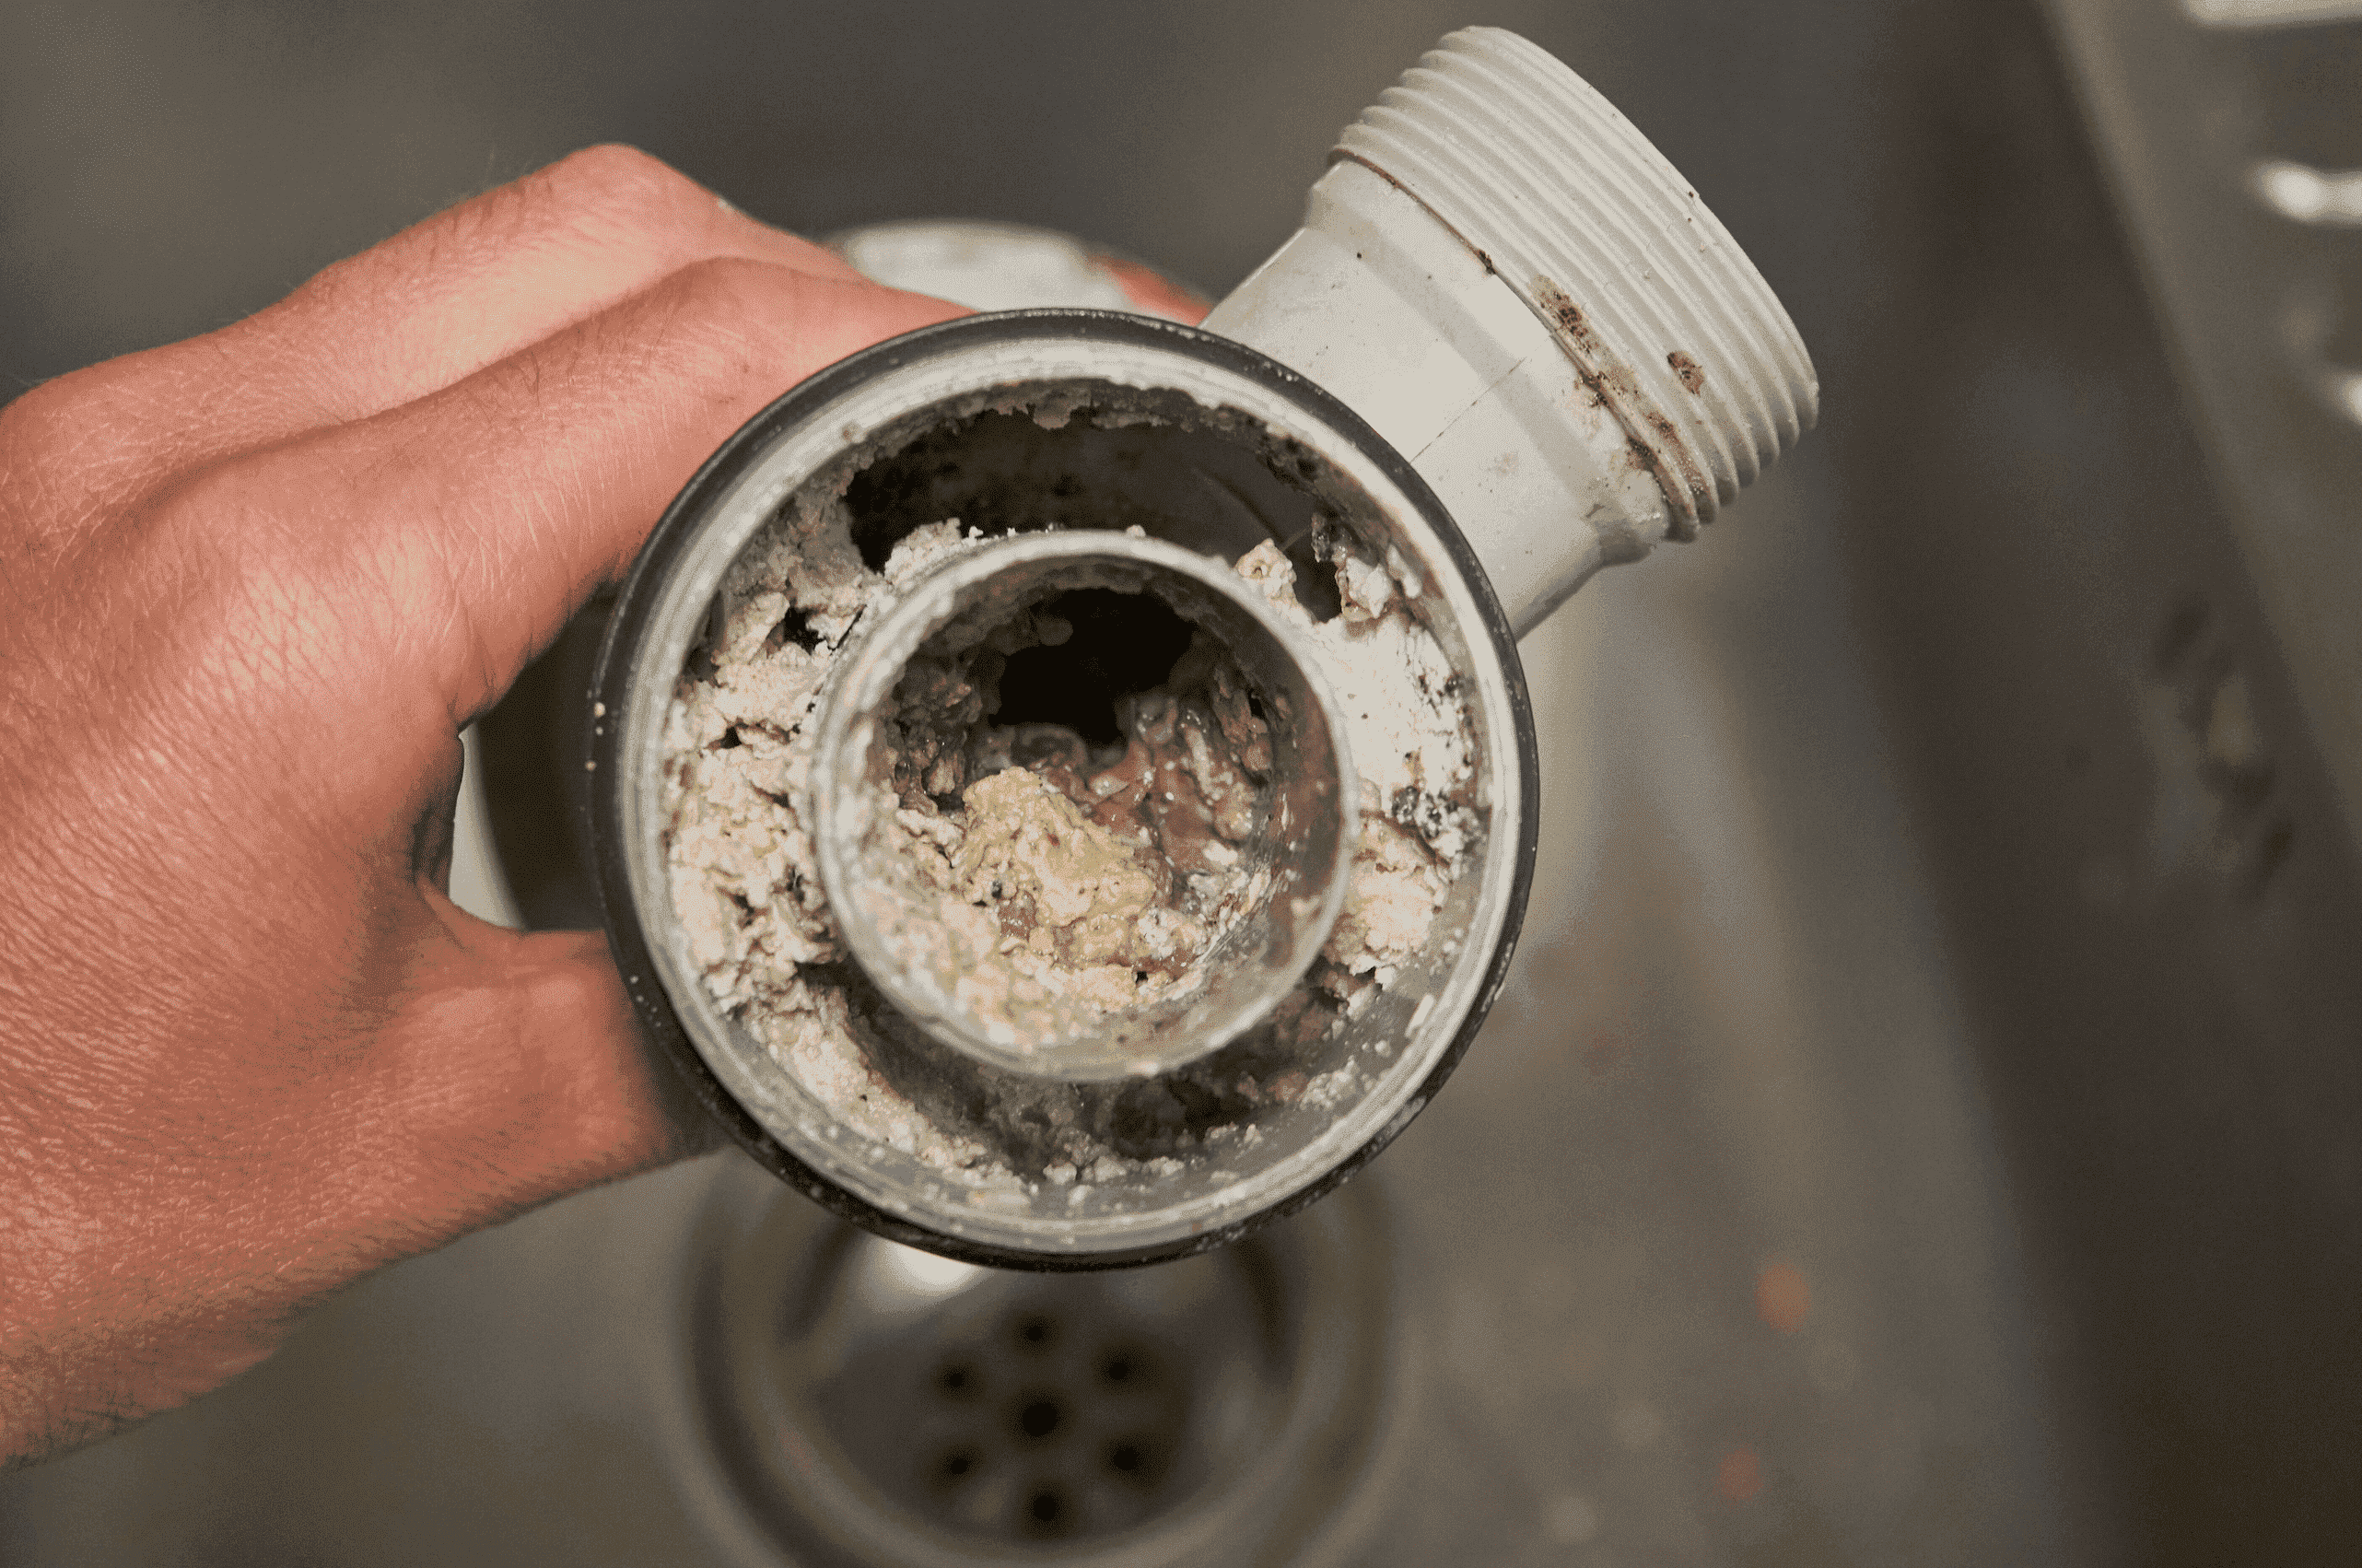 Fat, oil and grease build up in drain pipe